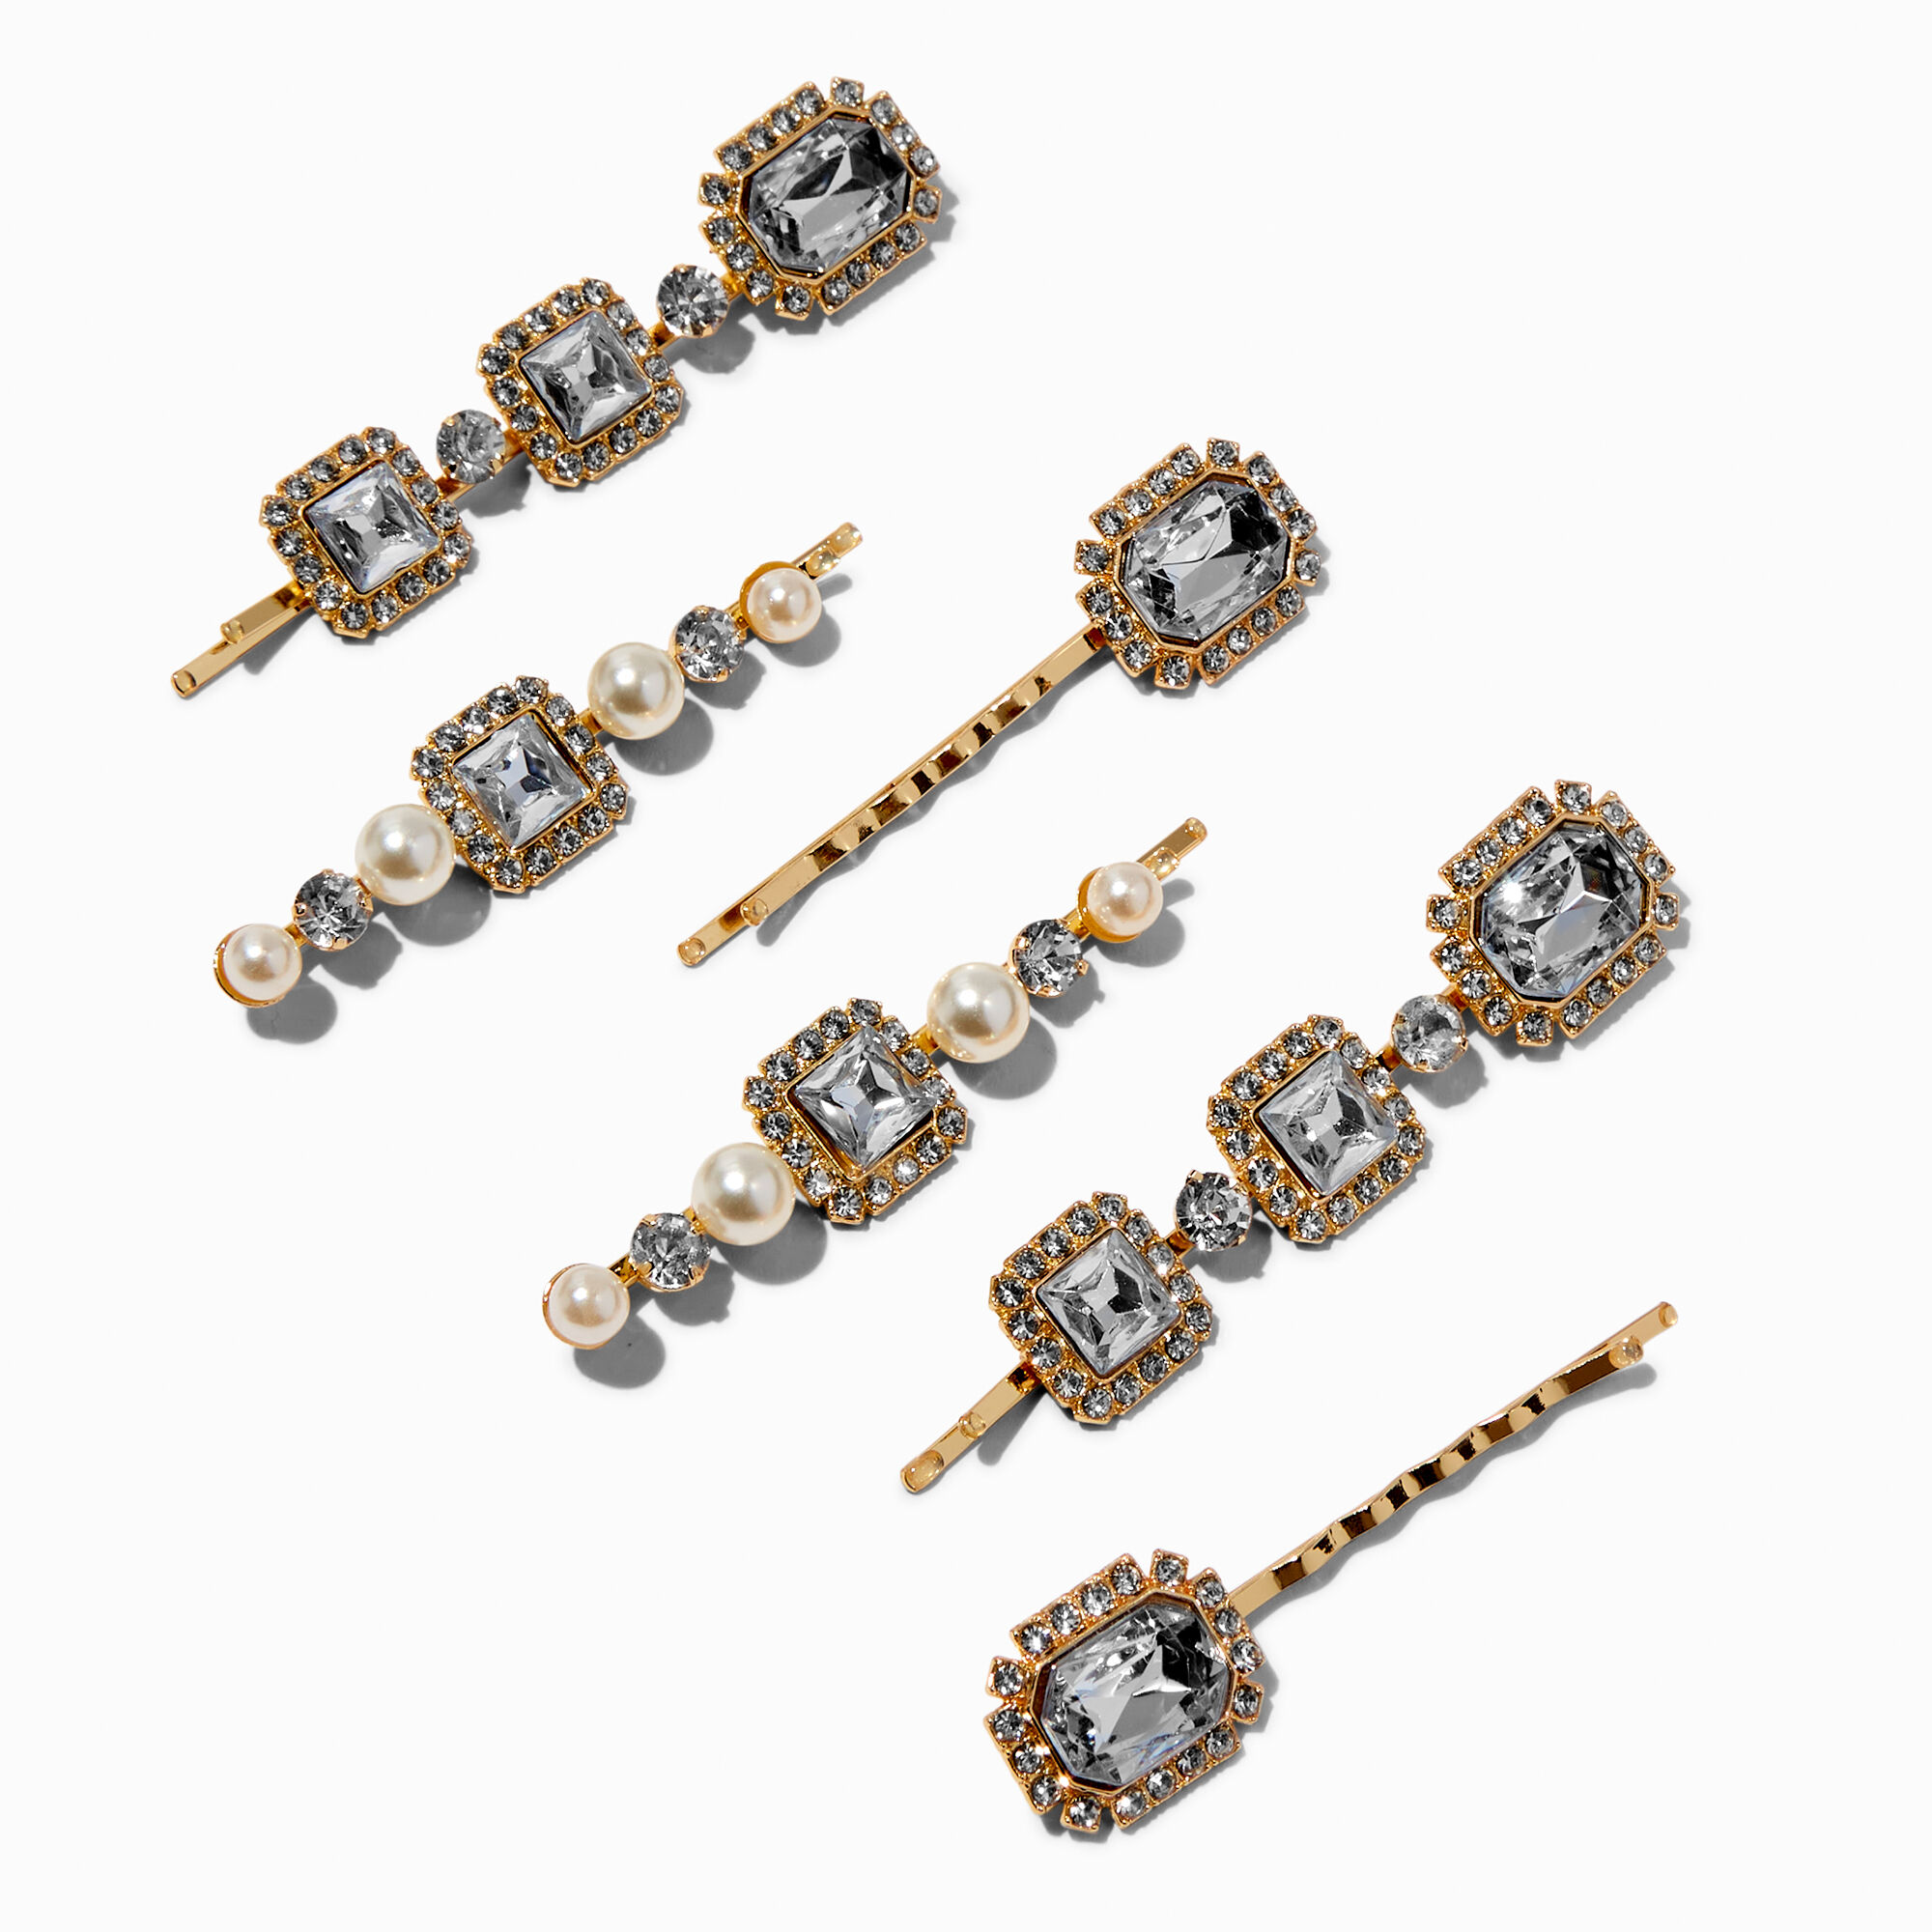 View Claires Rhinestone Pearl Tone Hair Pins 6 Pack Gold information